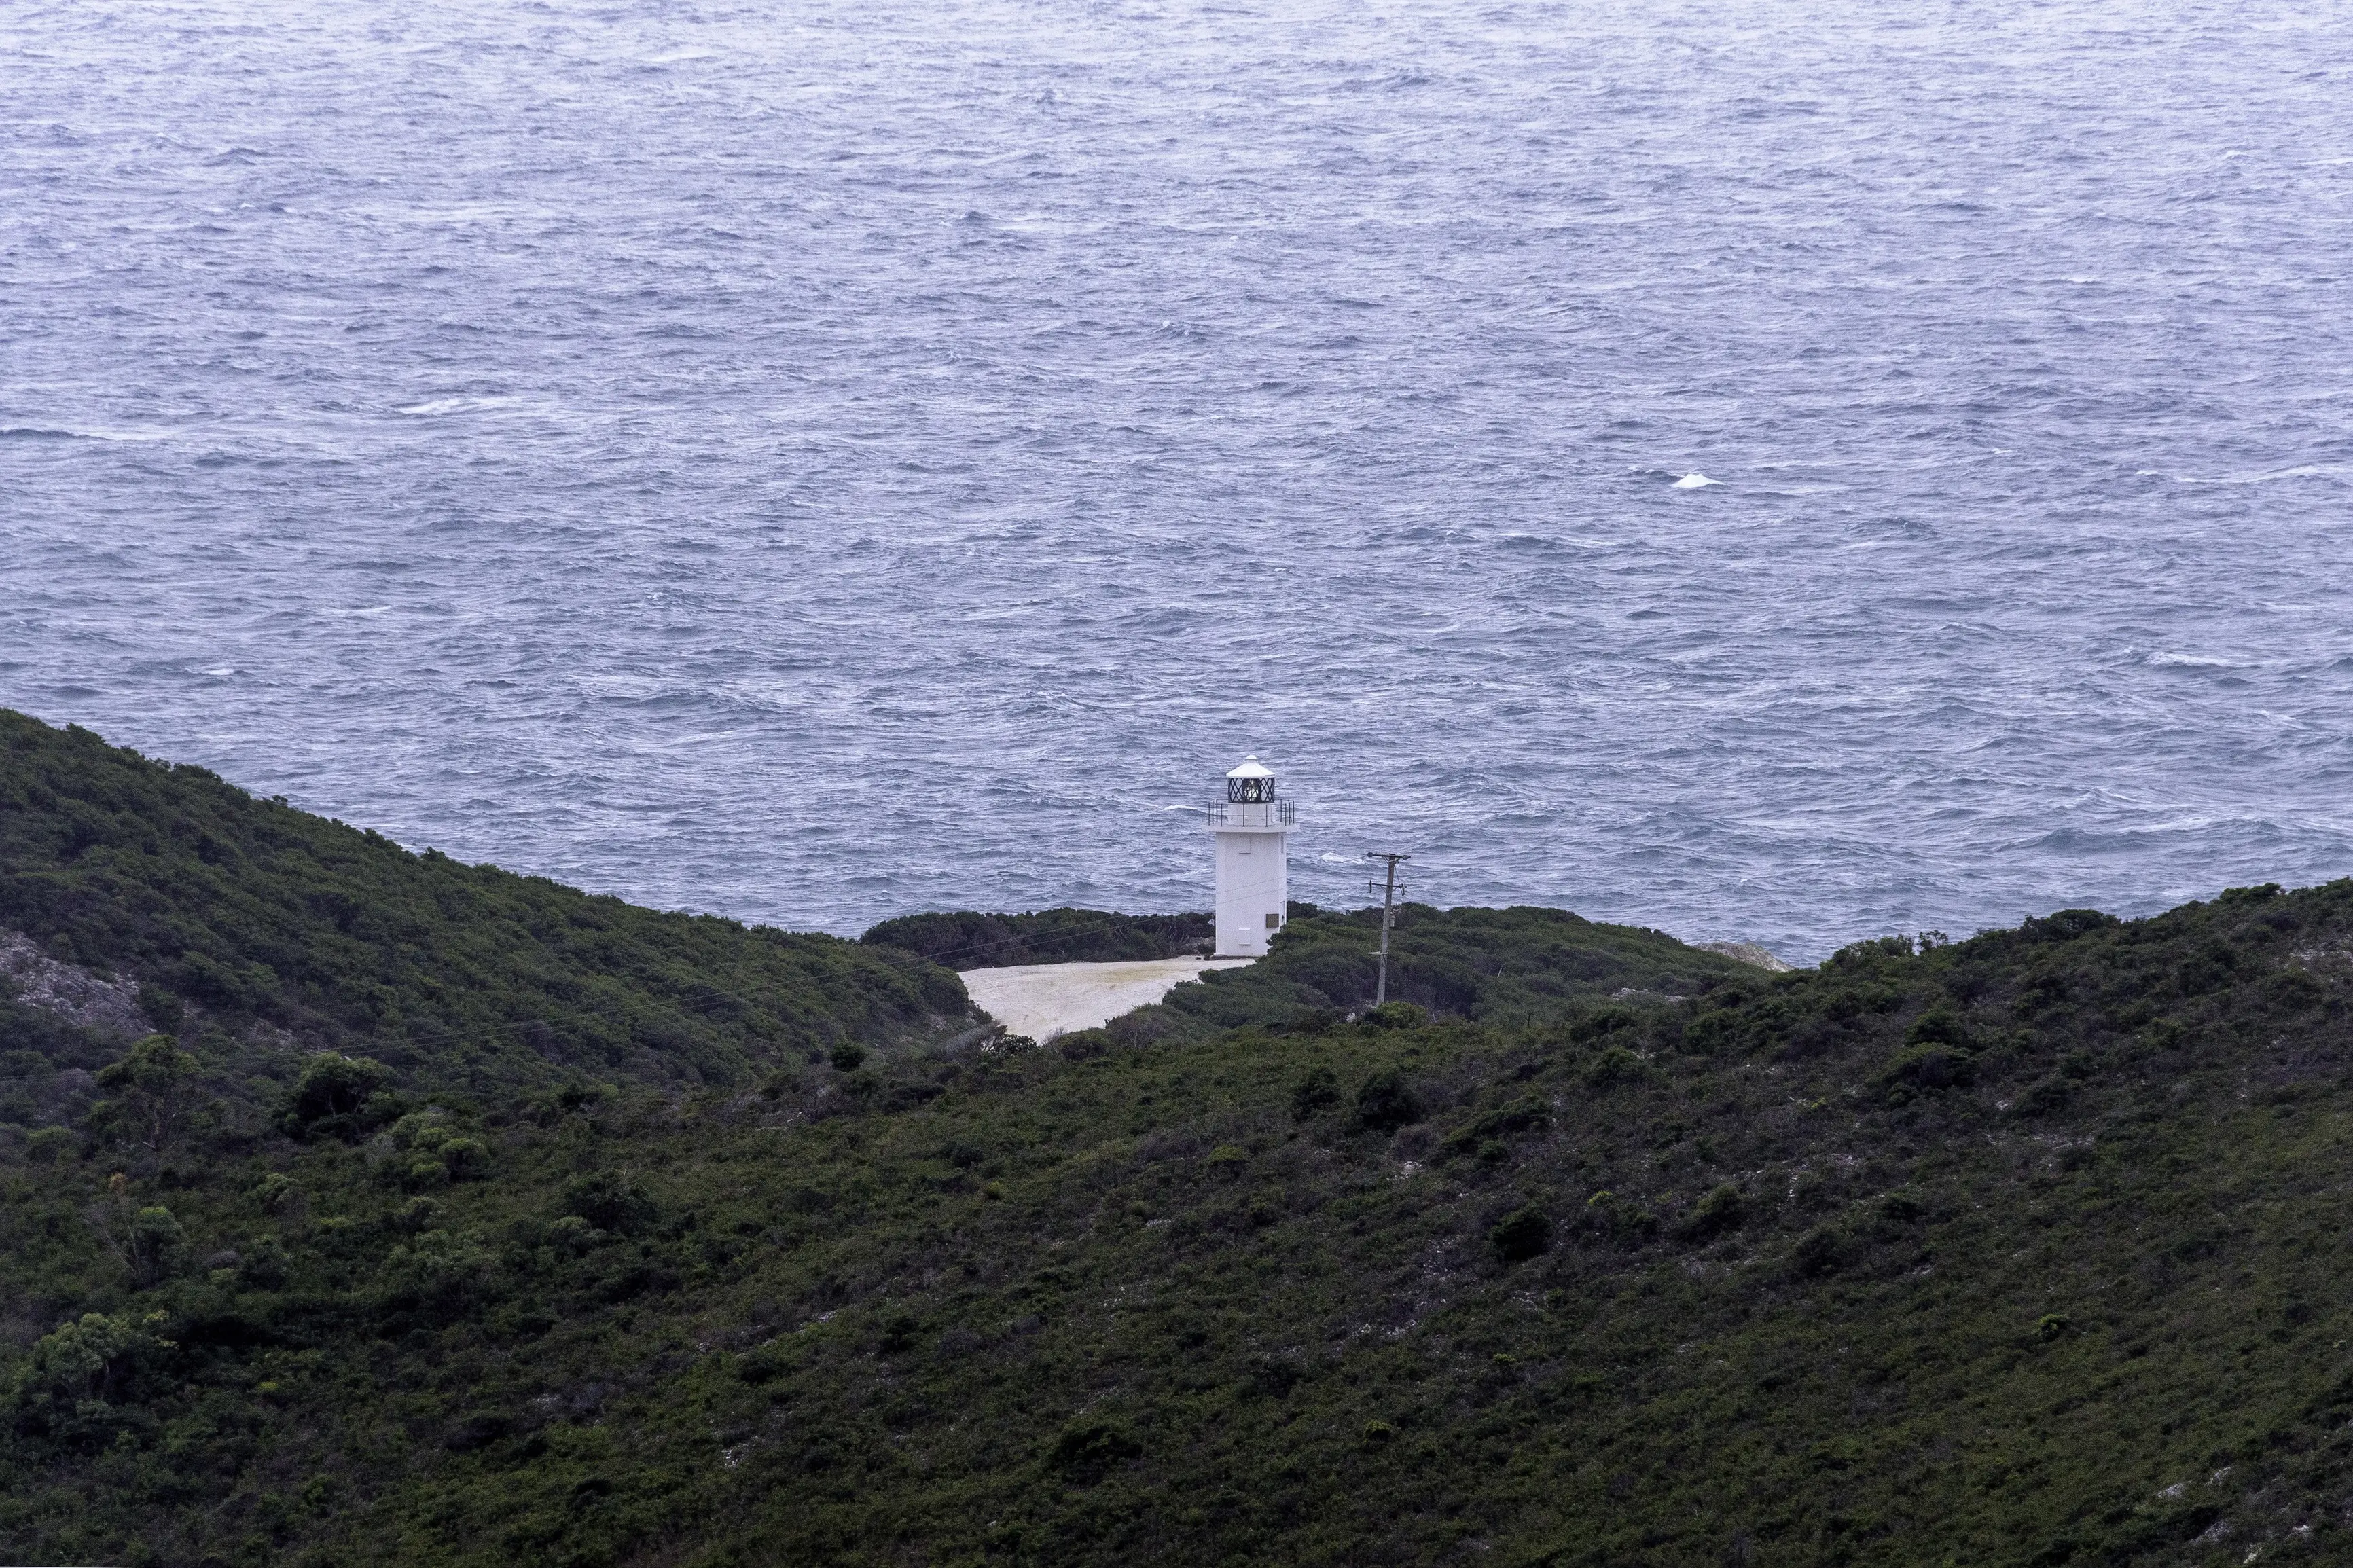 "Image of the Rocky Cape Lighthouse in the distance with large, rocky hills fill the foreground, on an overcast day. "